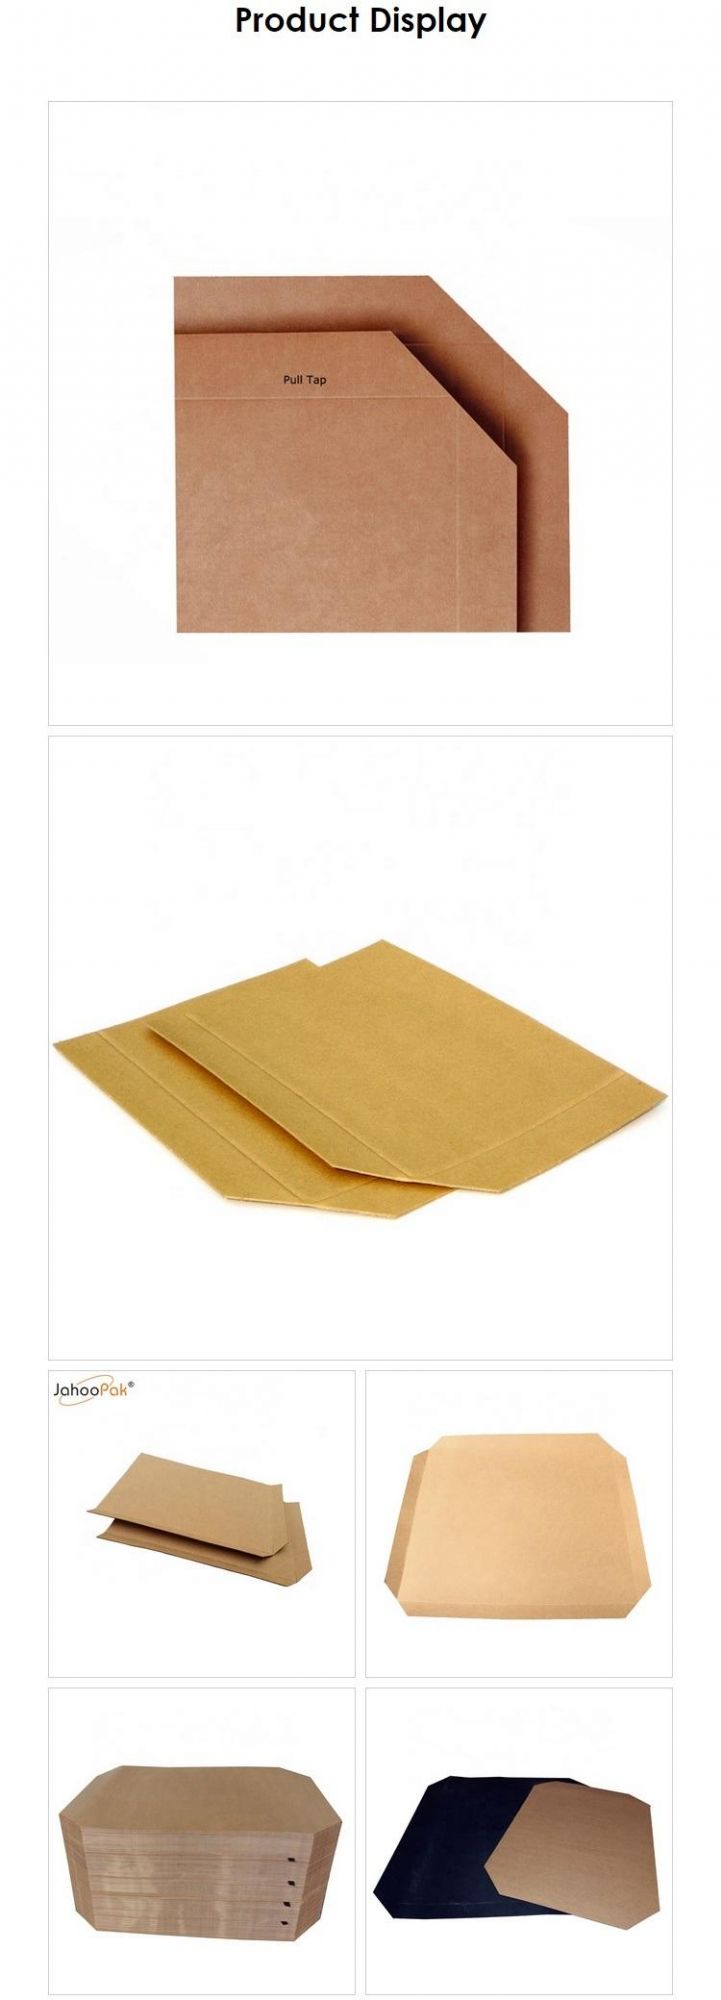 Brown Paper Anti-Pallet Slip Sheets for Pull Push Machine